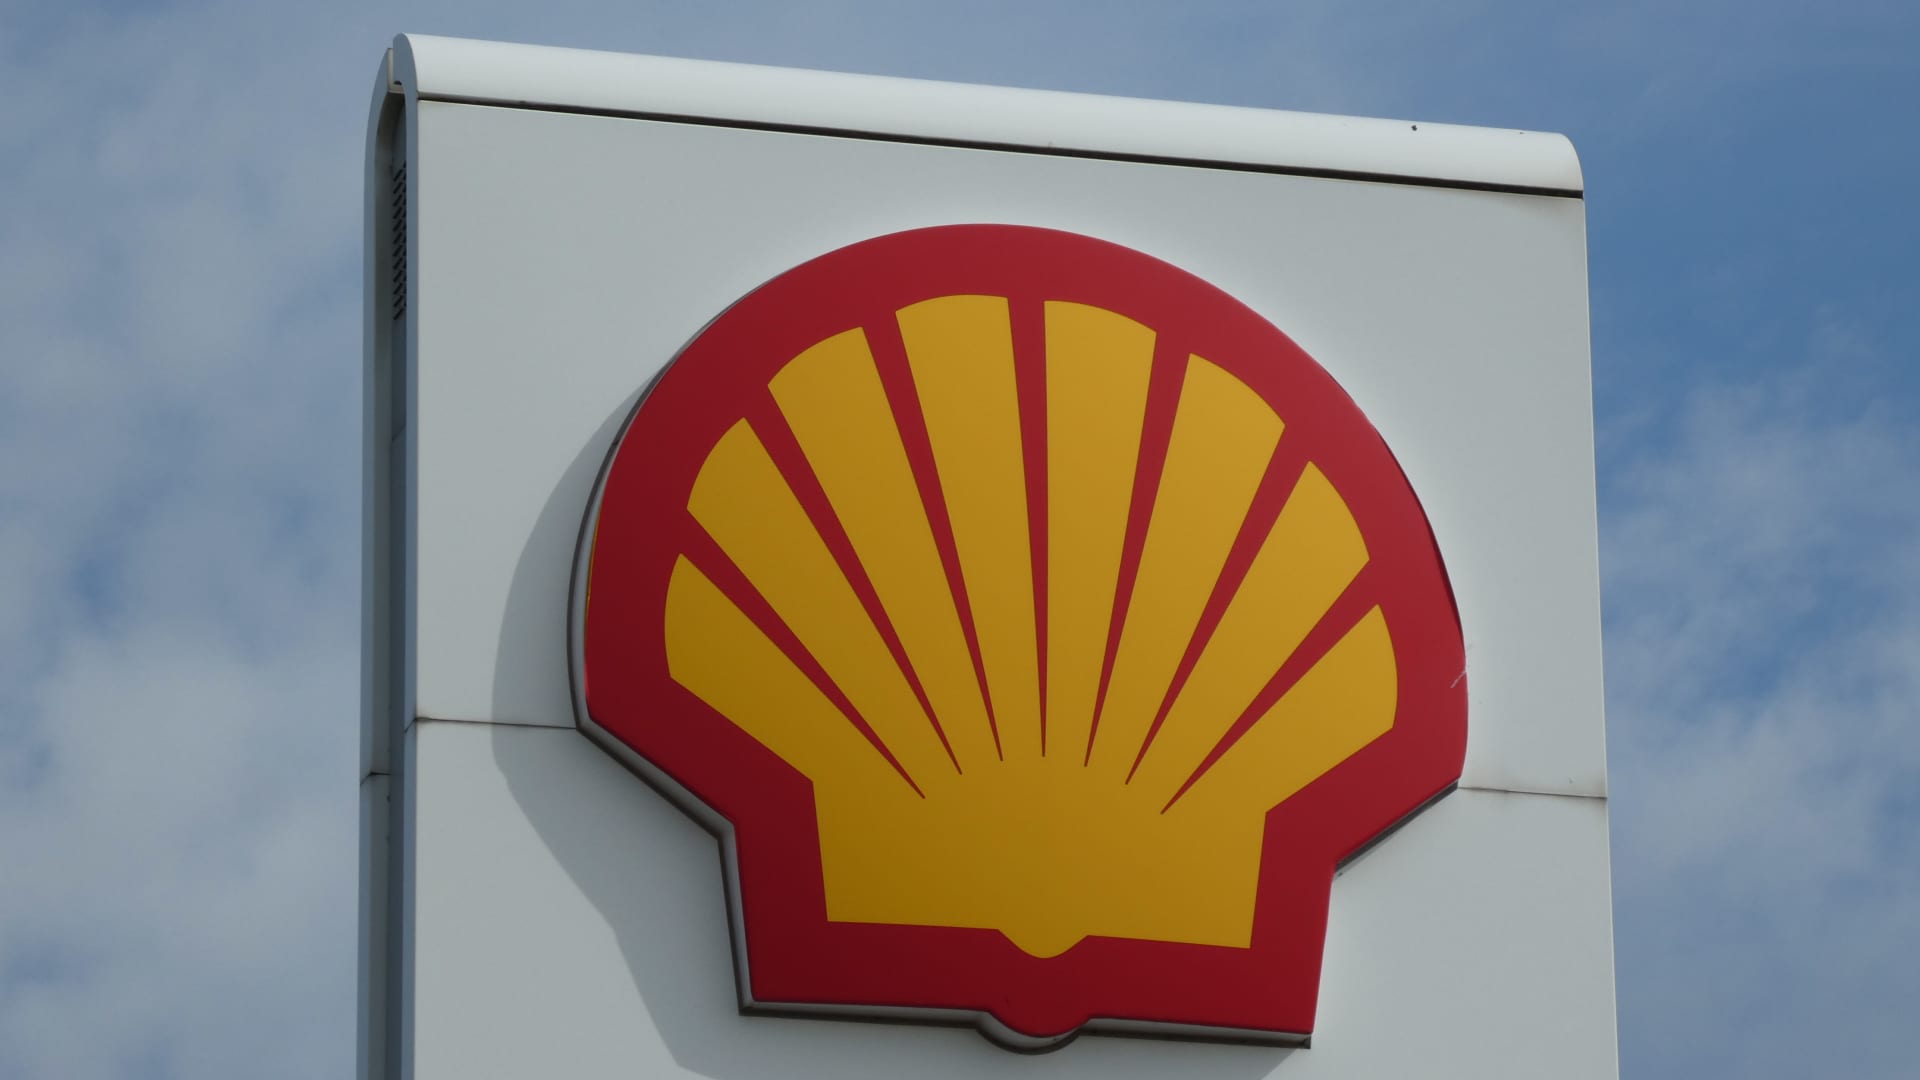 Oil giant Shell posts sharp drop in profit on weaker commodity prices